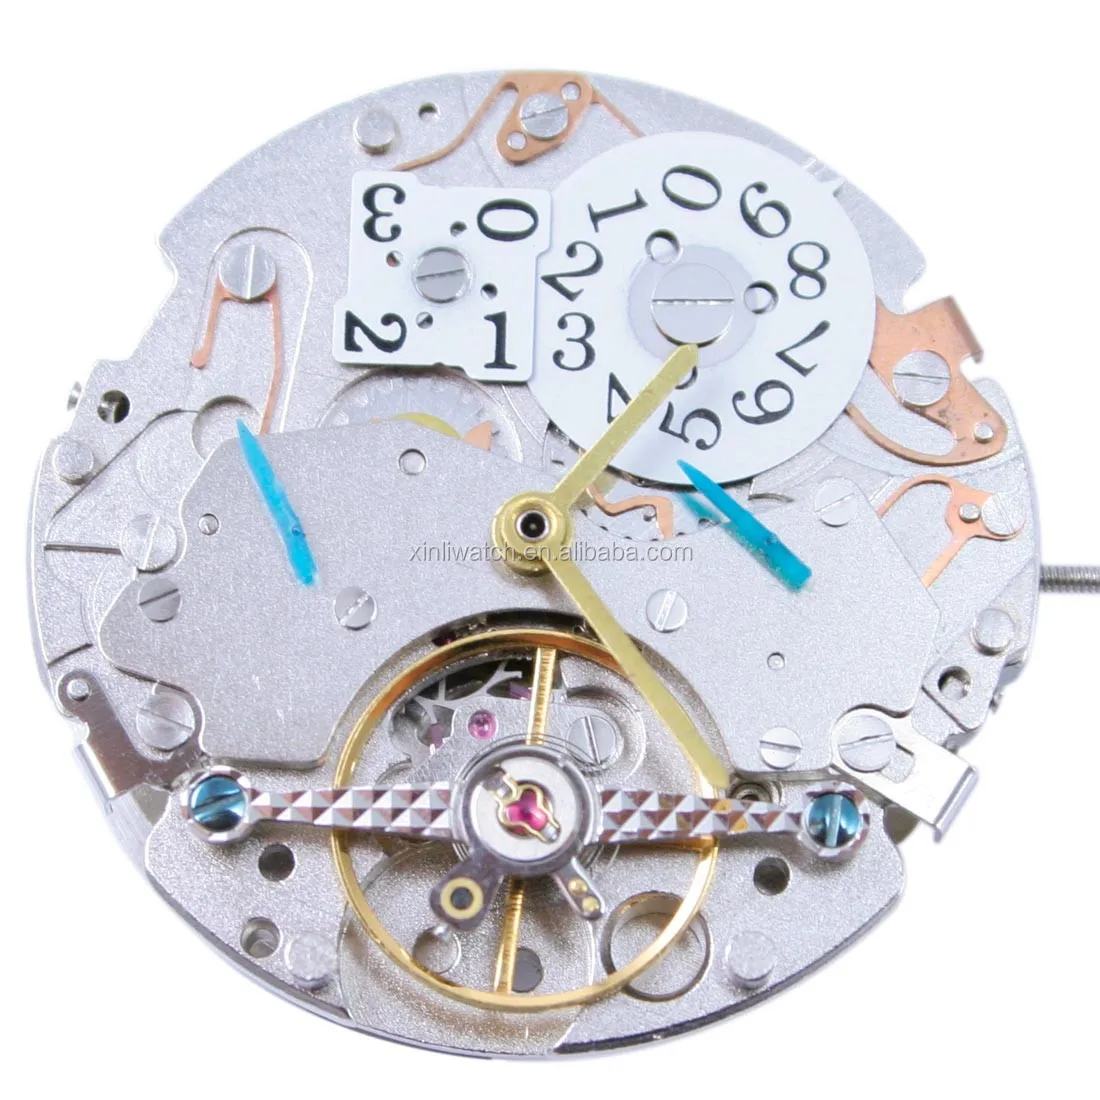 Watch Part Of Movement China 2l27 Automatic Movement - Buy Automatic/  Quartz Watch Movements Parts,Seiko Movement Pc32 Watch,China Made Watch  Japan Movement Product on 